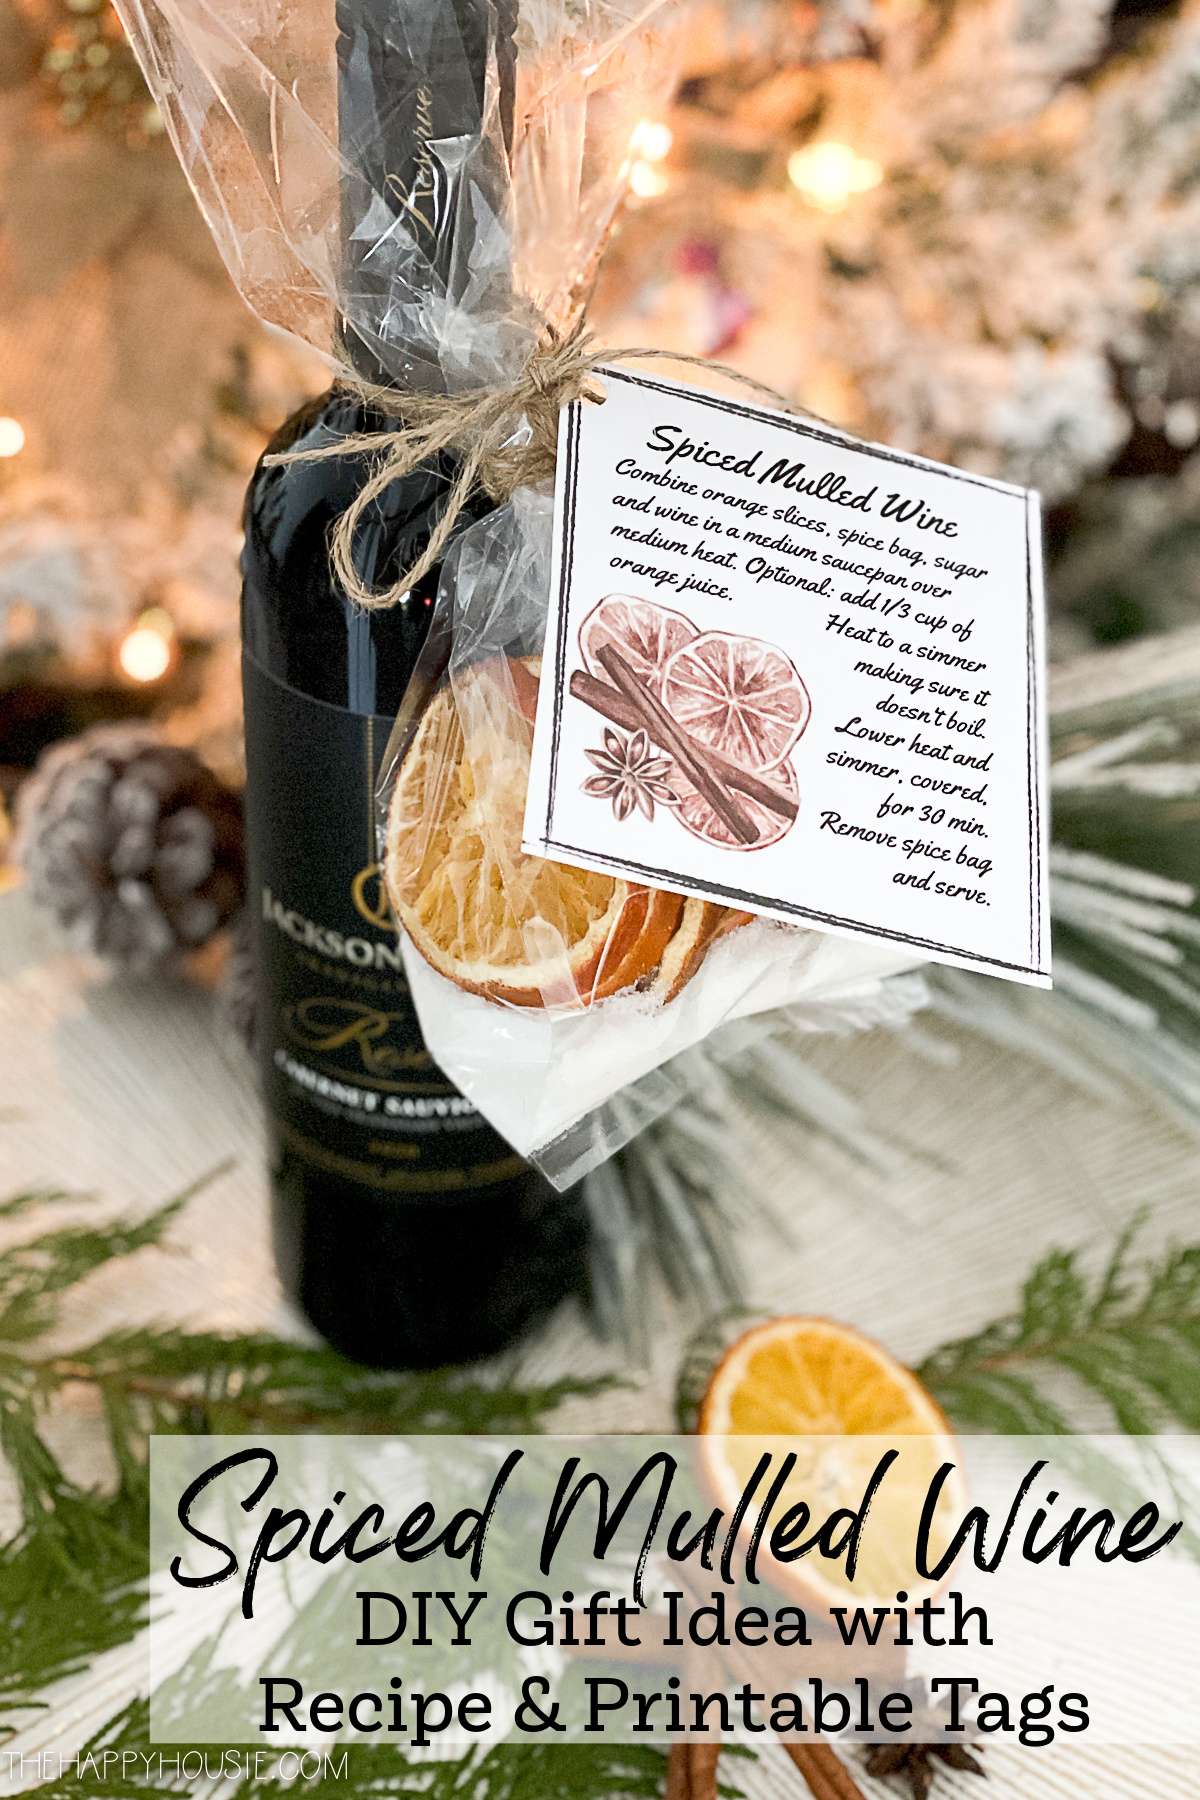 https://www.thehappyhousie.com/wp-content/uploads/2021/12/Spiced-Mulled-Wine-DIY-Gift-Idea-with-Recipe-and-Printable-Tags.jpg